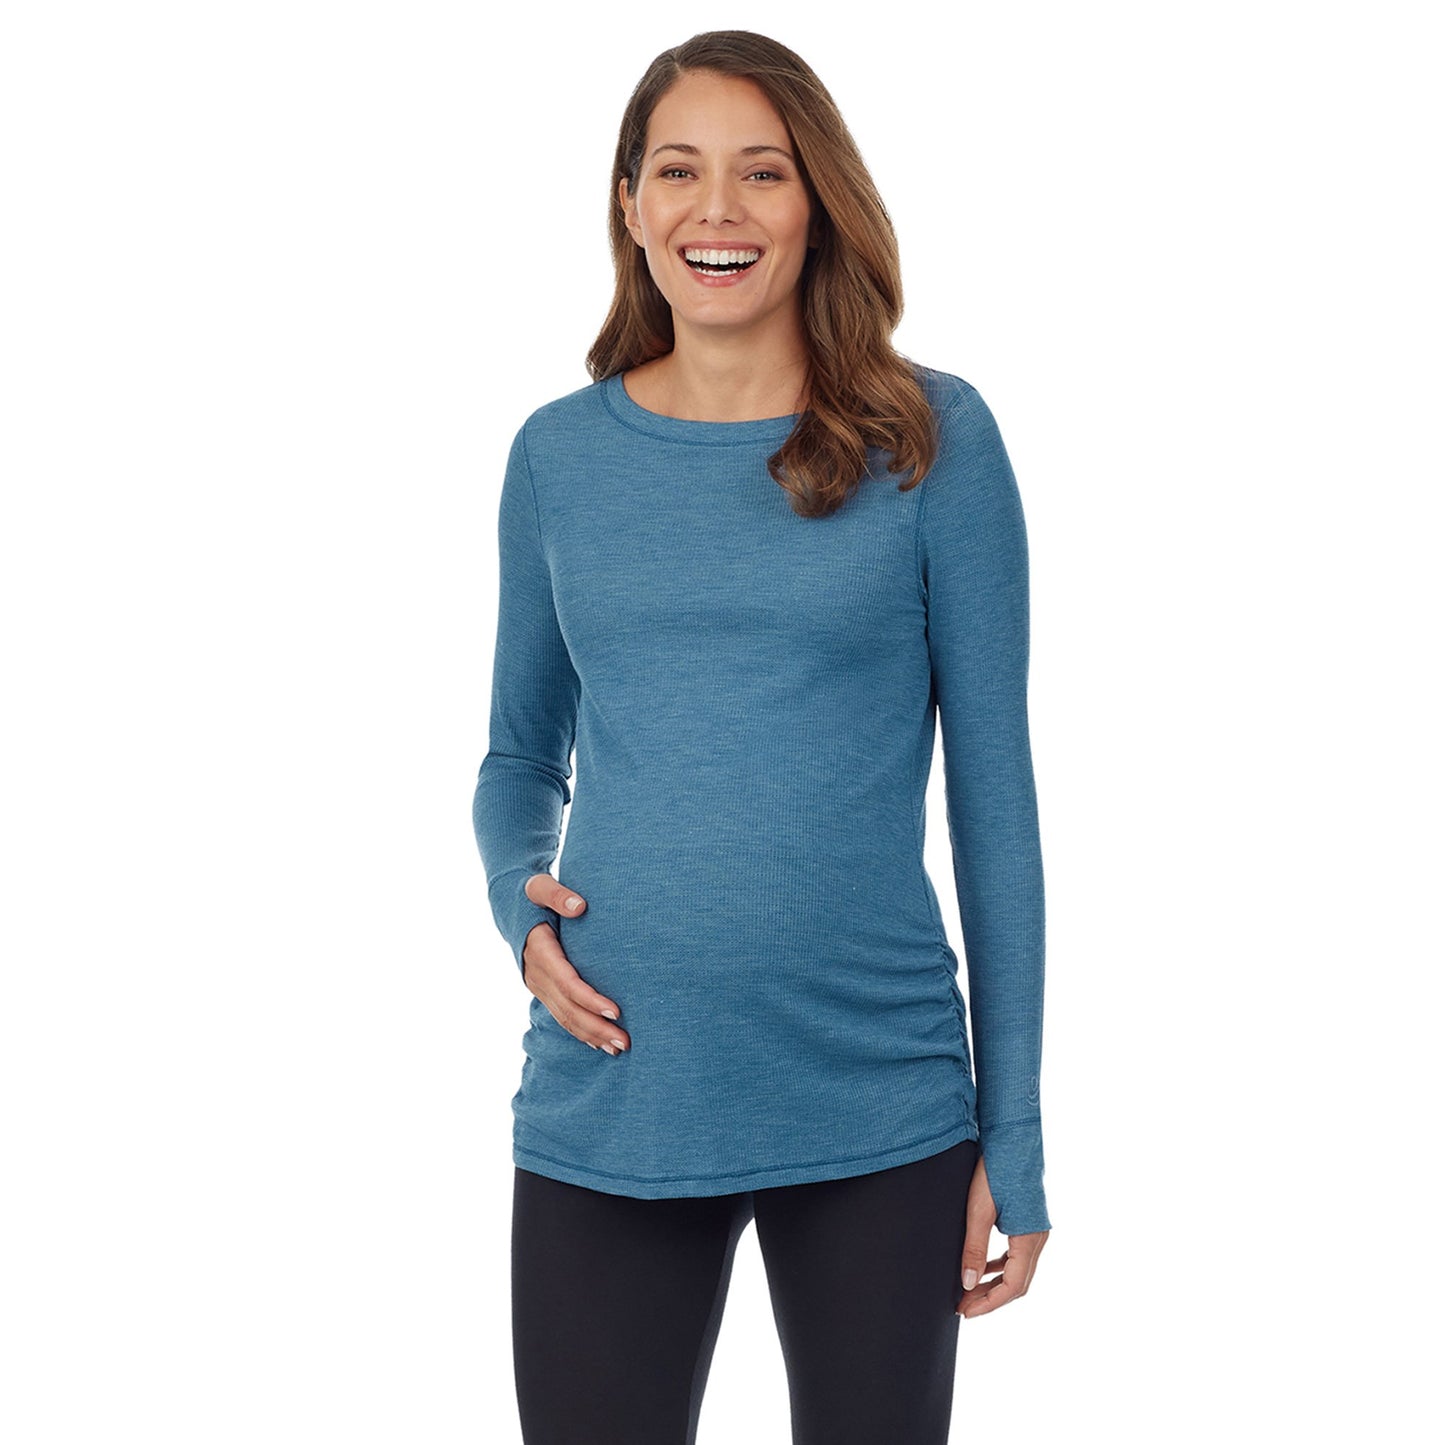 Vintage Blue Heather;Model is wearing a size S. She is 5’10”, Bust 34”, Waist 34”, Hips 40”.# Model is wearing a maternity bump.@ A lady wearingStretch Thermal Maternity Long Sleeve Ballet Neck Top with Vintage Blue Heather print